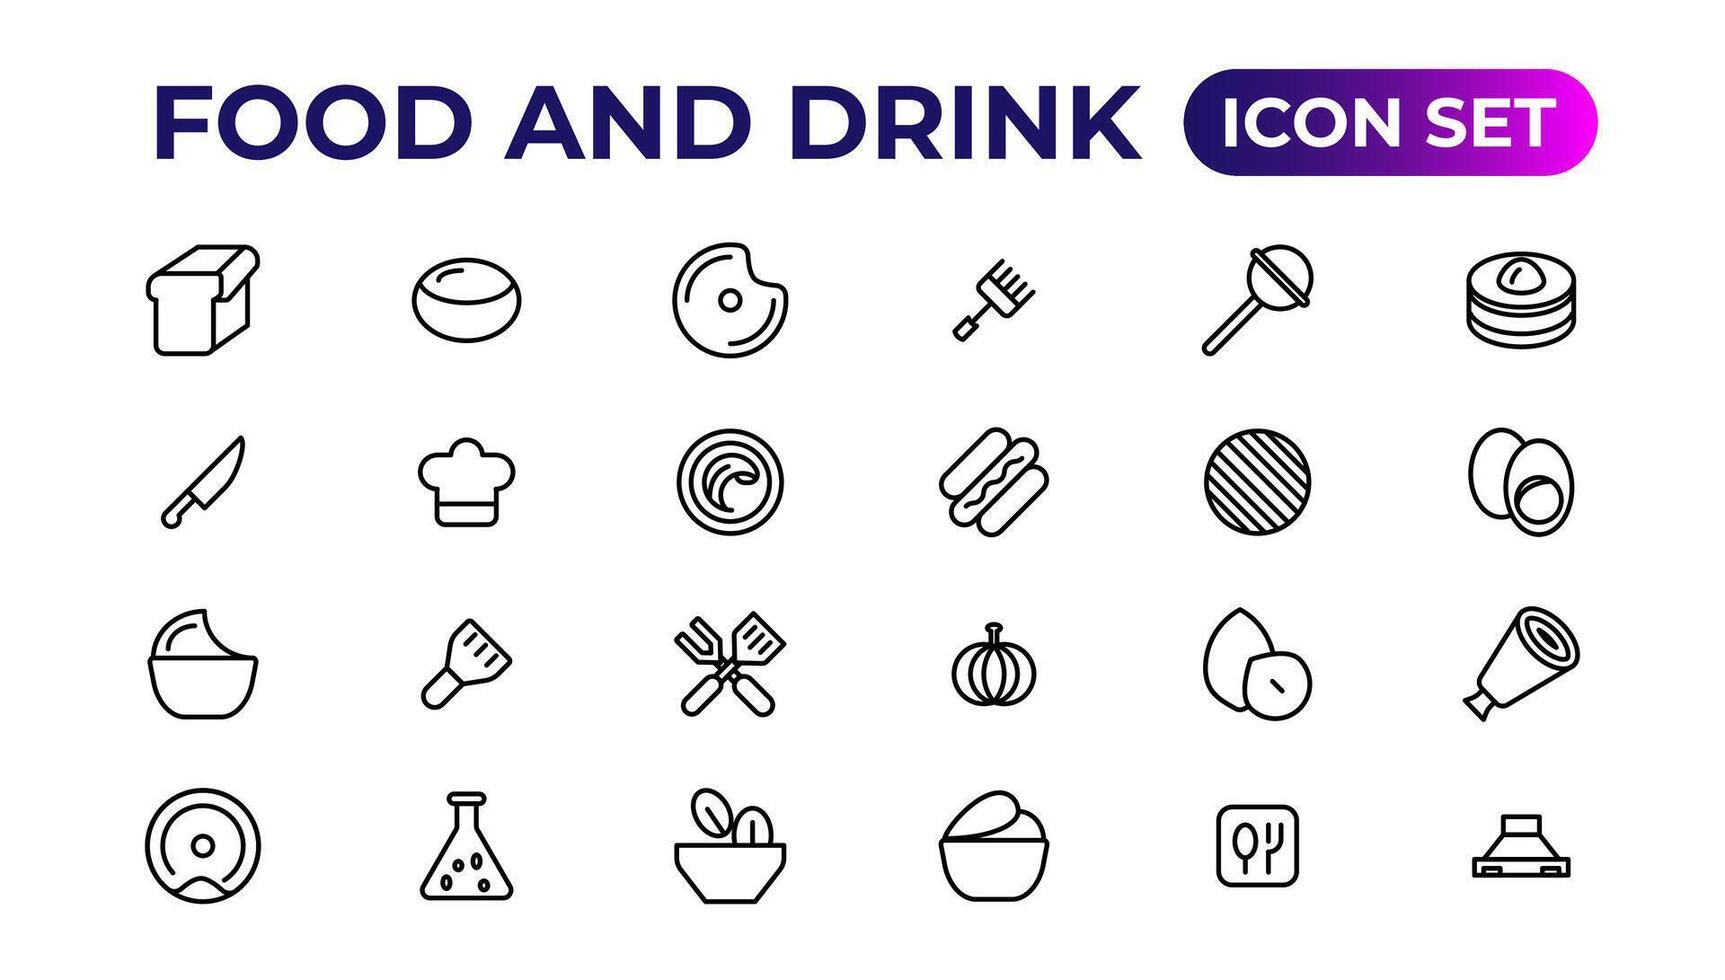 food and drink icons. filled icons such as drink water,apple leaf,pack,kitchen pack,barbecue grill,raspberry leaf,boiler,wine bottle and glass. vector